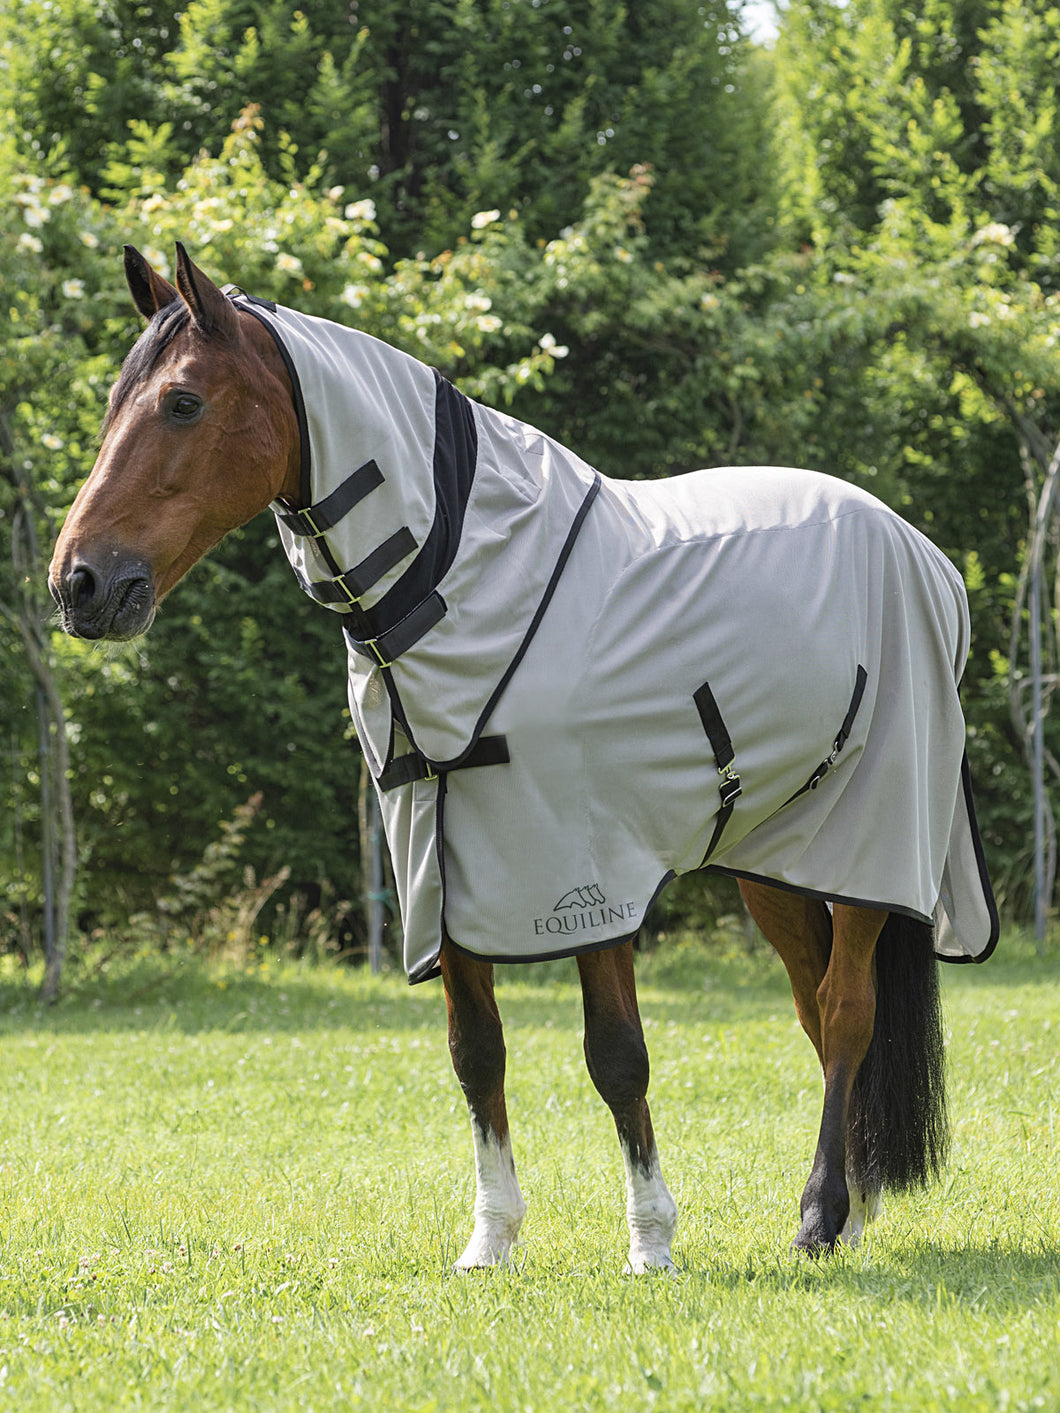 Equiline mesh paddock blanket with neck